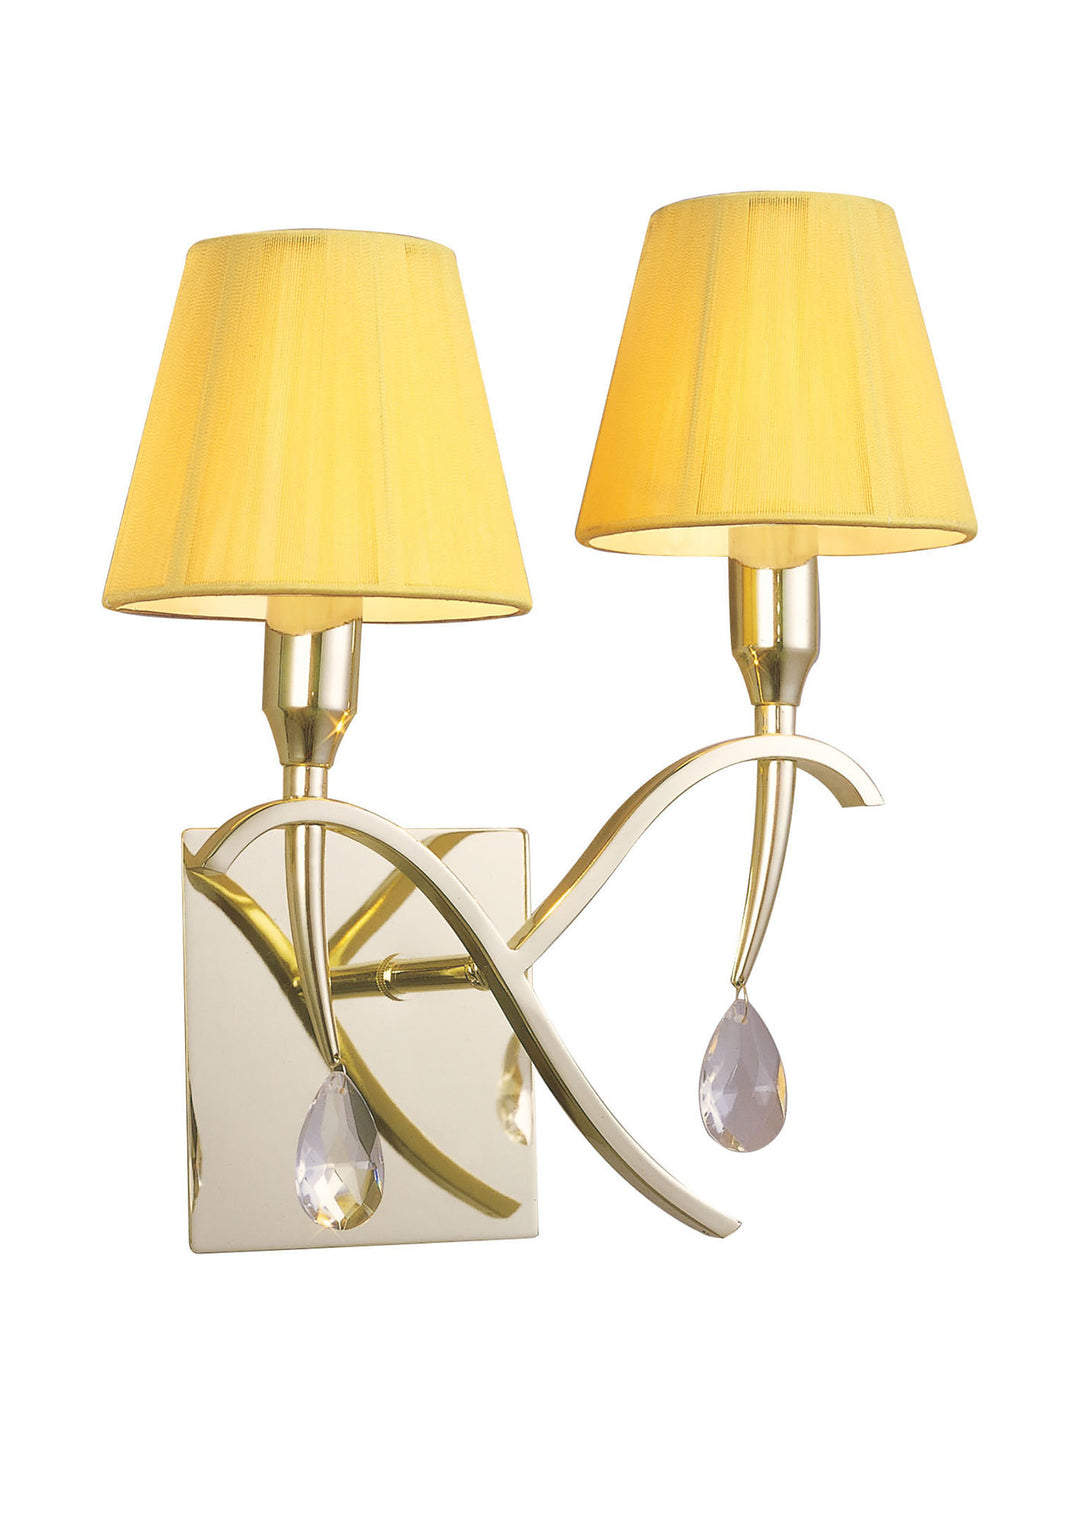 Mantra M0348PB/S Siena Switched Wall Lamp 2 Light